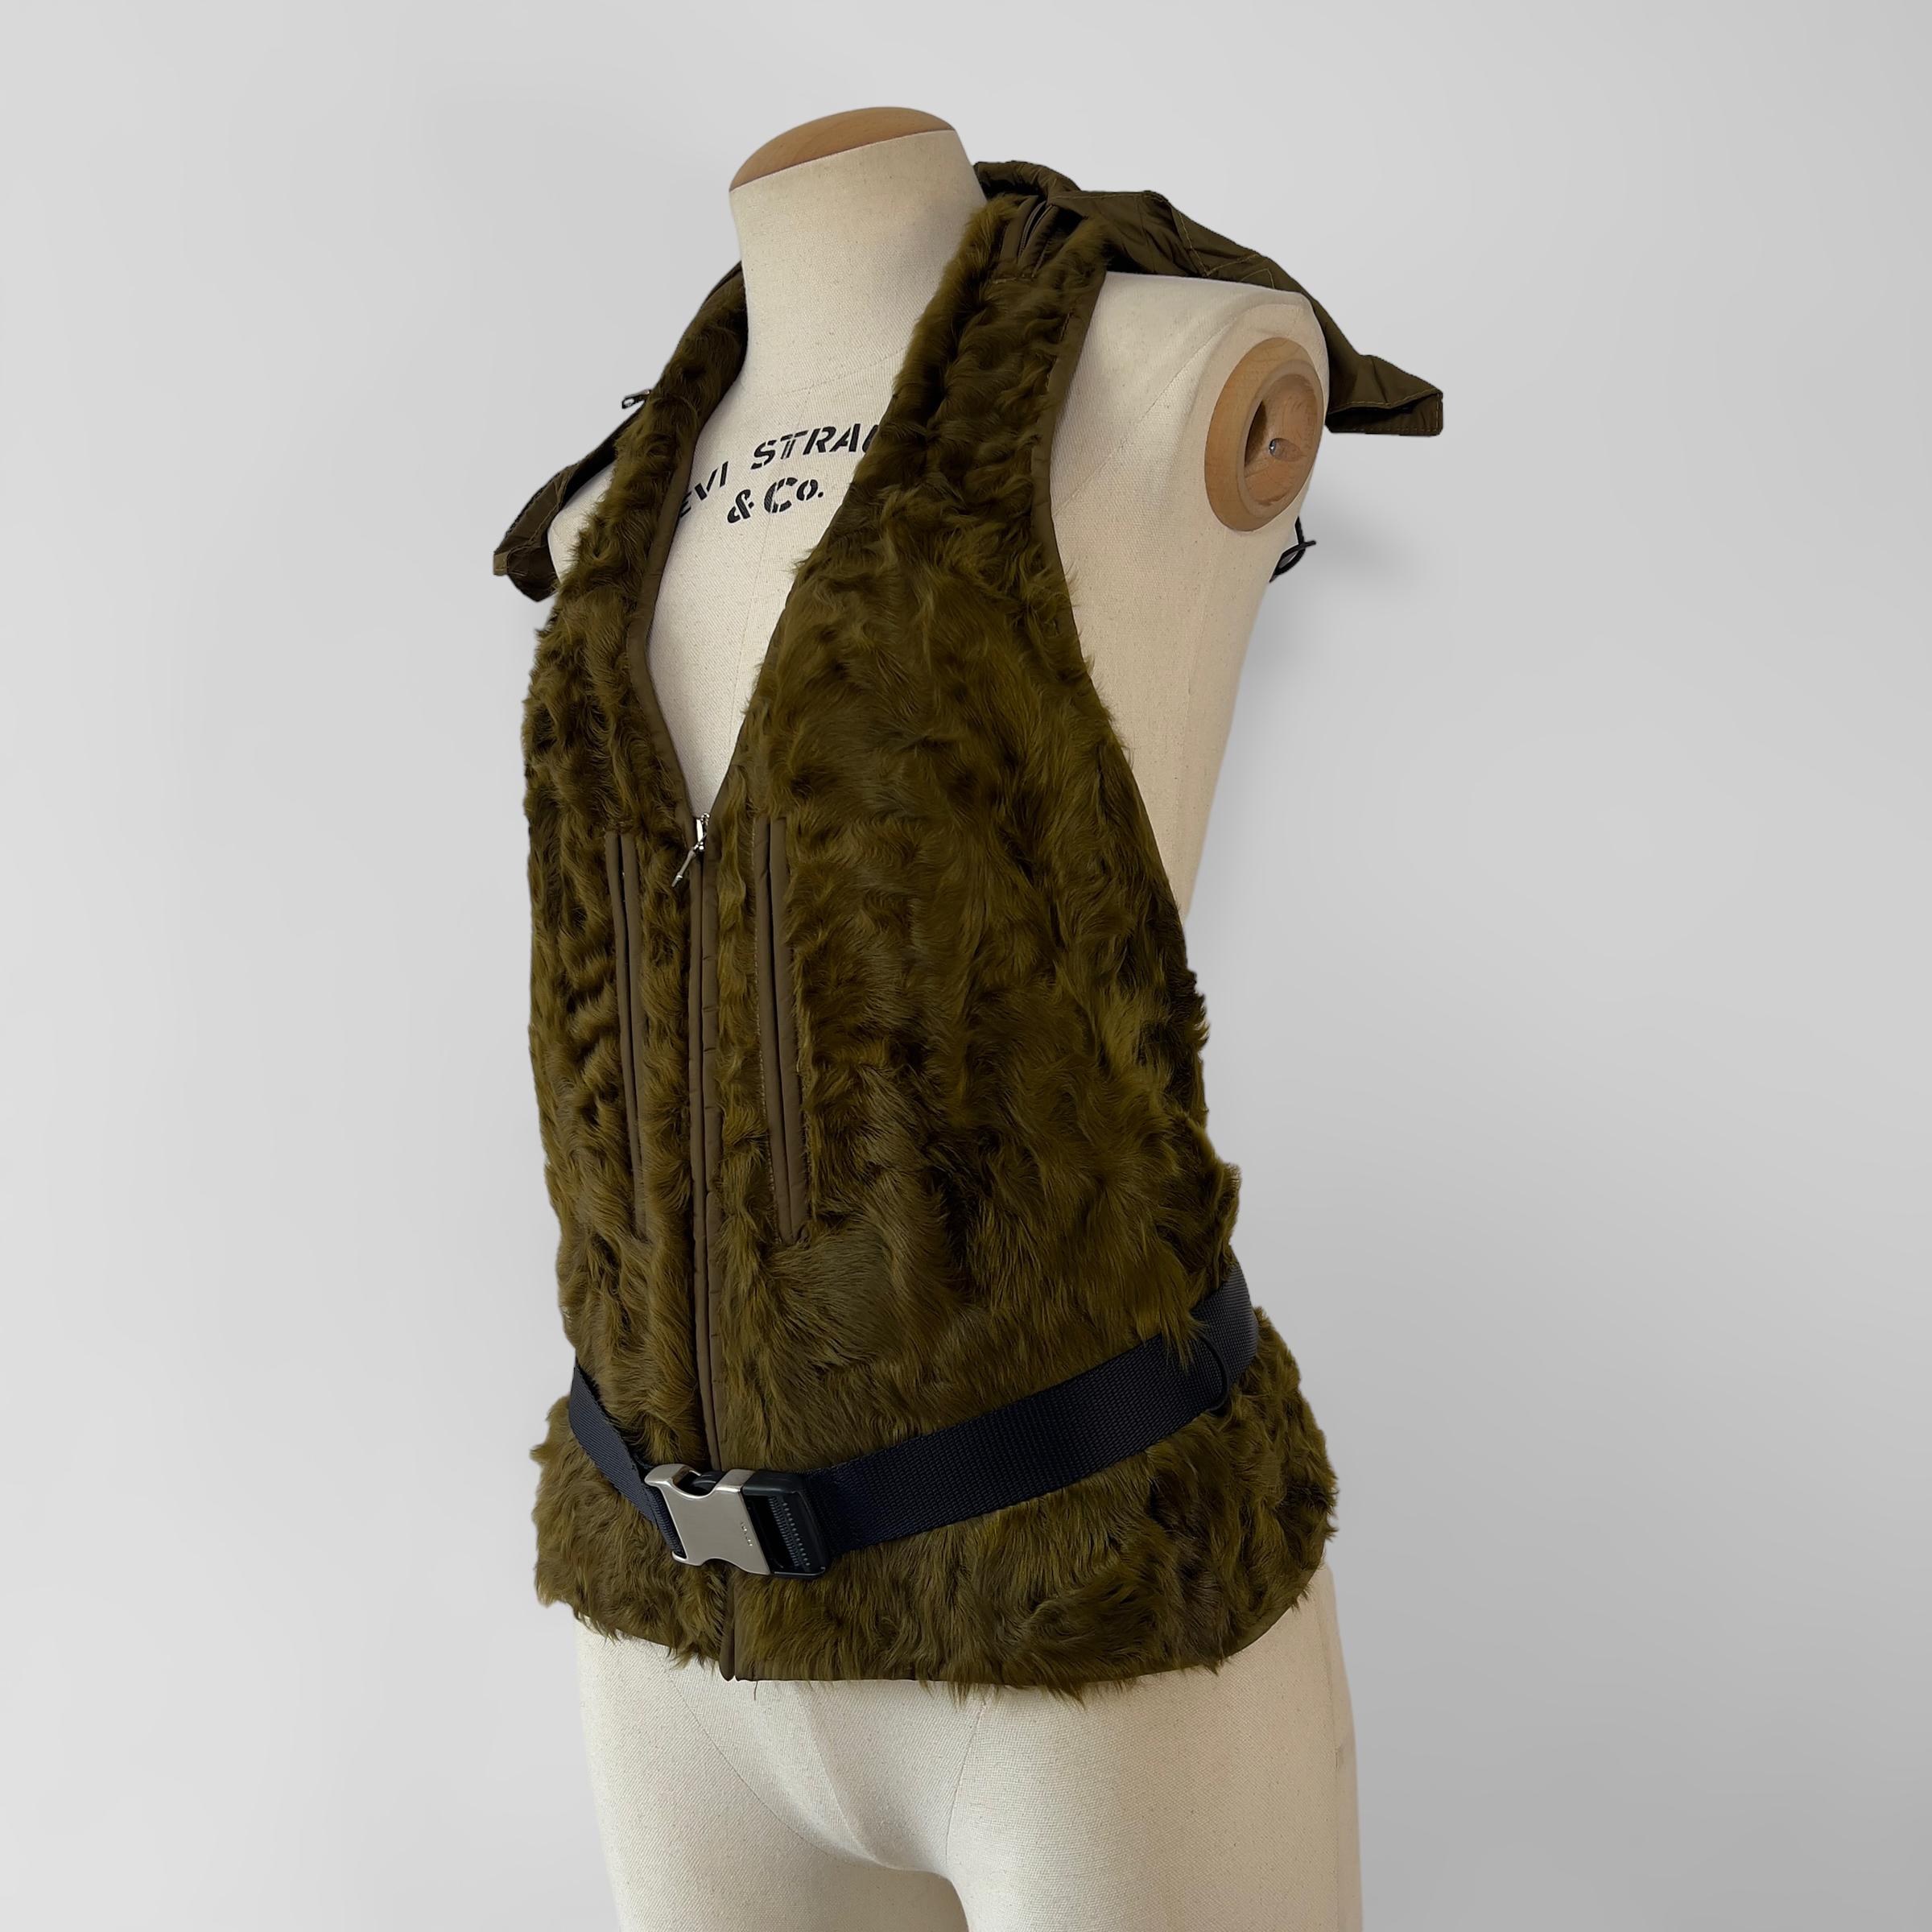 Vintage Prada runway lamb backless waistcoat with nylon buckle belt and nylon hood.  Fall-Winter 1999

Size: IT 42.

`Condition: very good with minimal to no fur loss. 